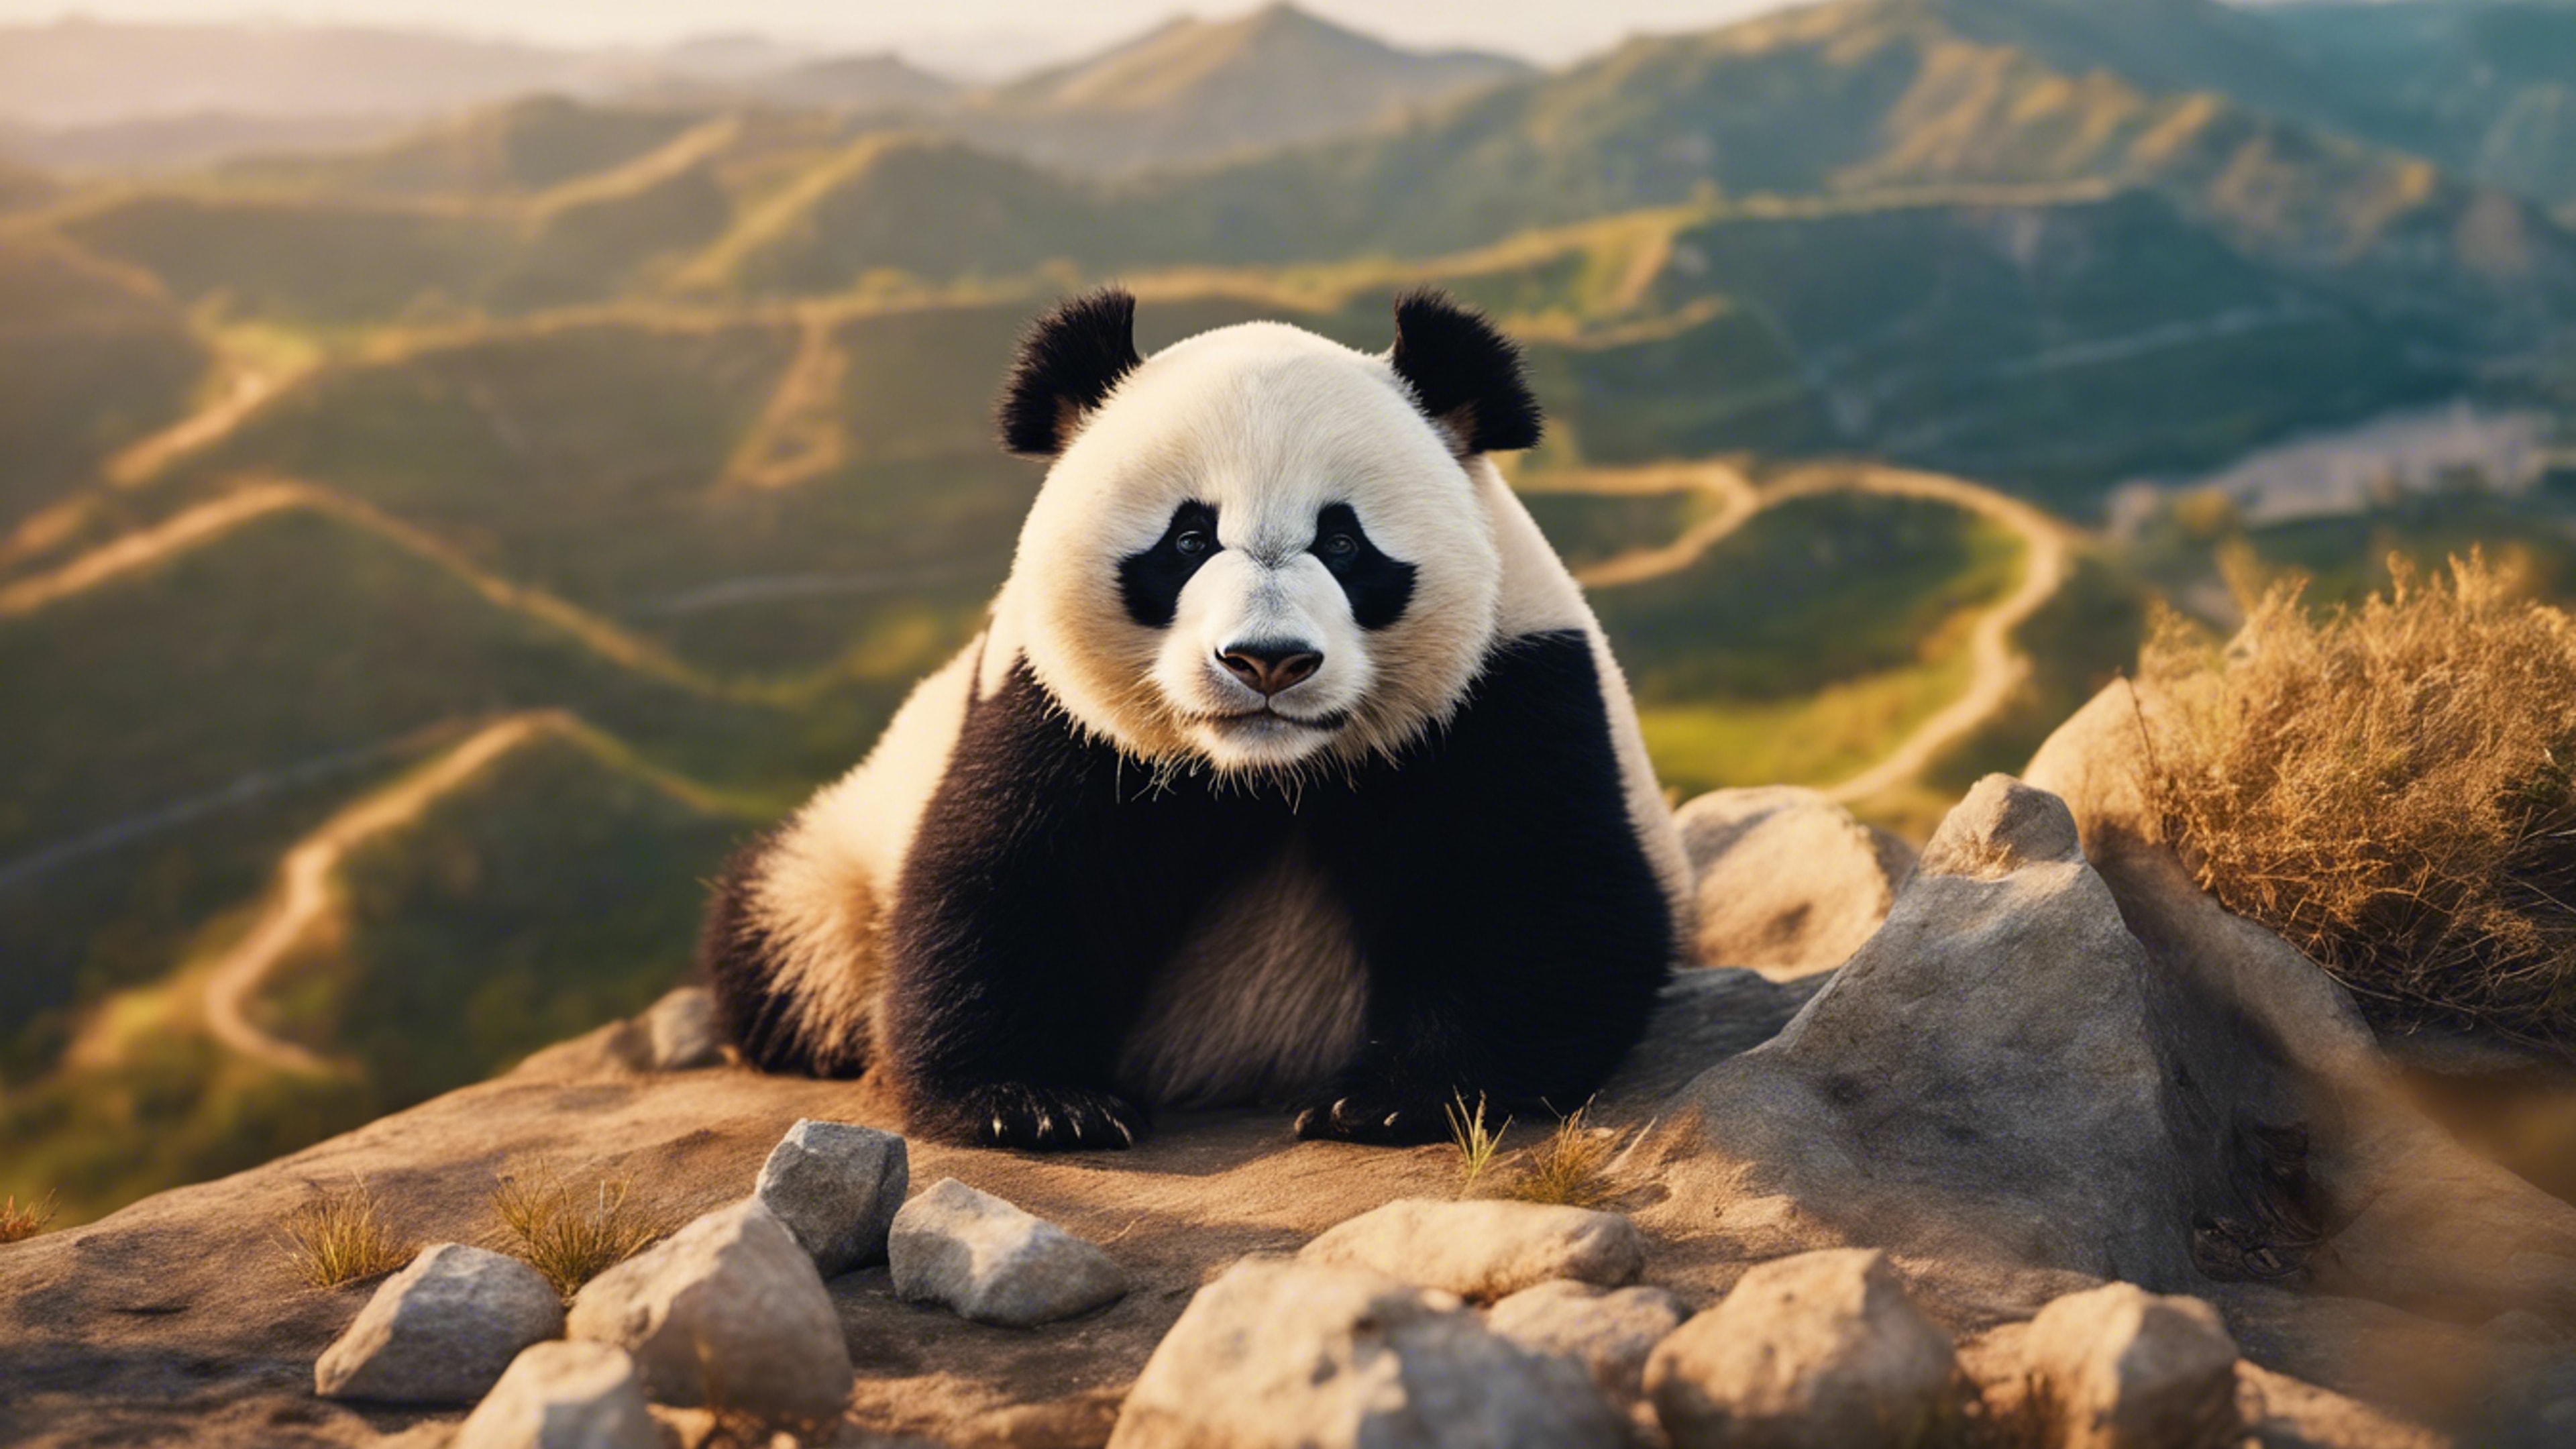 A proud panda basking in the warm sunlight, on a cliff overlooking a wide, beautiful valley. Ფონი[f1b4c4cbced14ad39a34]